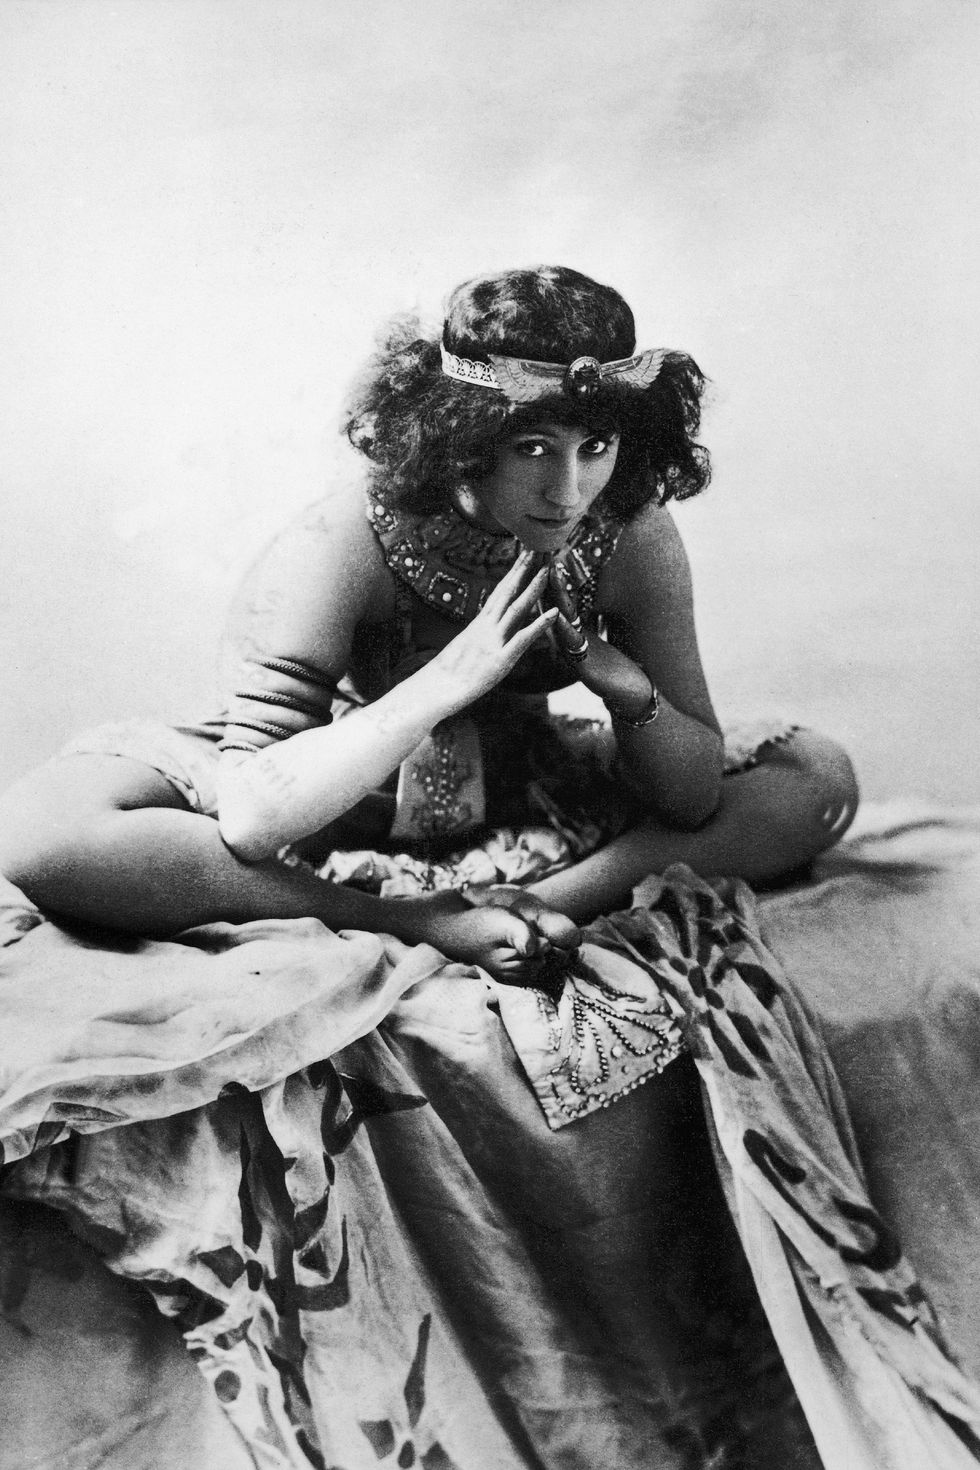 <p>The female French novelist is best known for her novel, <em>Gigi</em>. Working as a mime and actress on the side, she capitalized on her dramatic flair for fashion as seen here, posing as an Egyptian queen. Her costumes on stage were revealing for the time and often caused a scandal. </p>